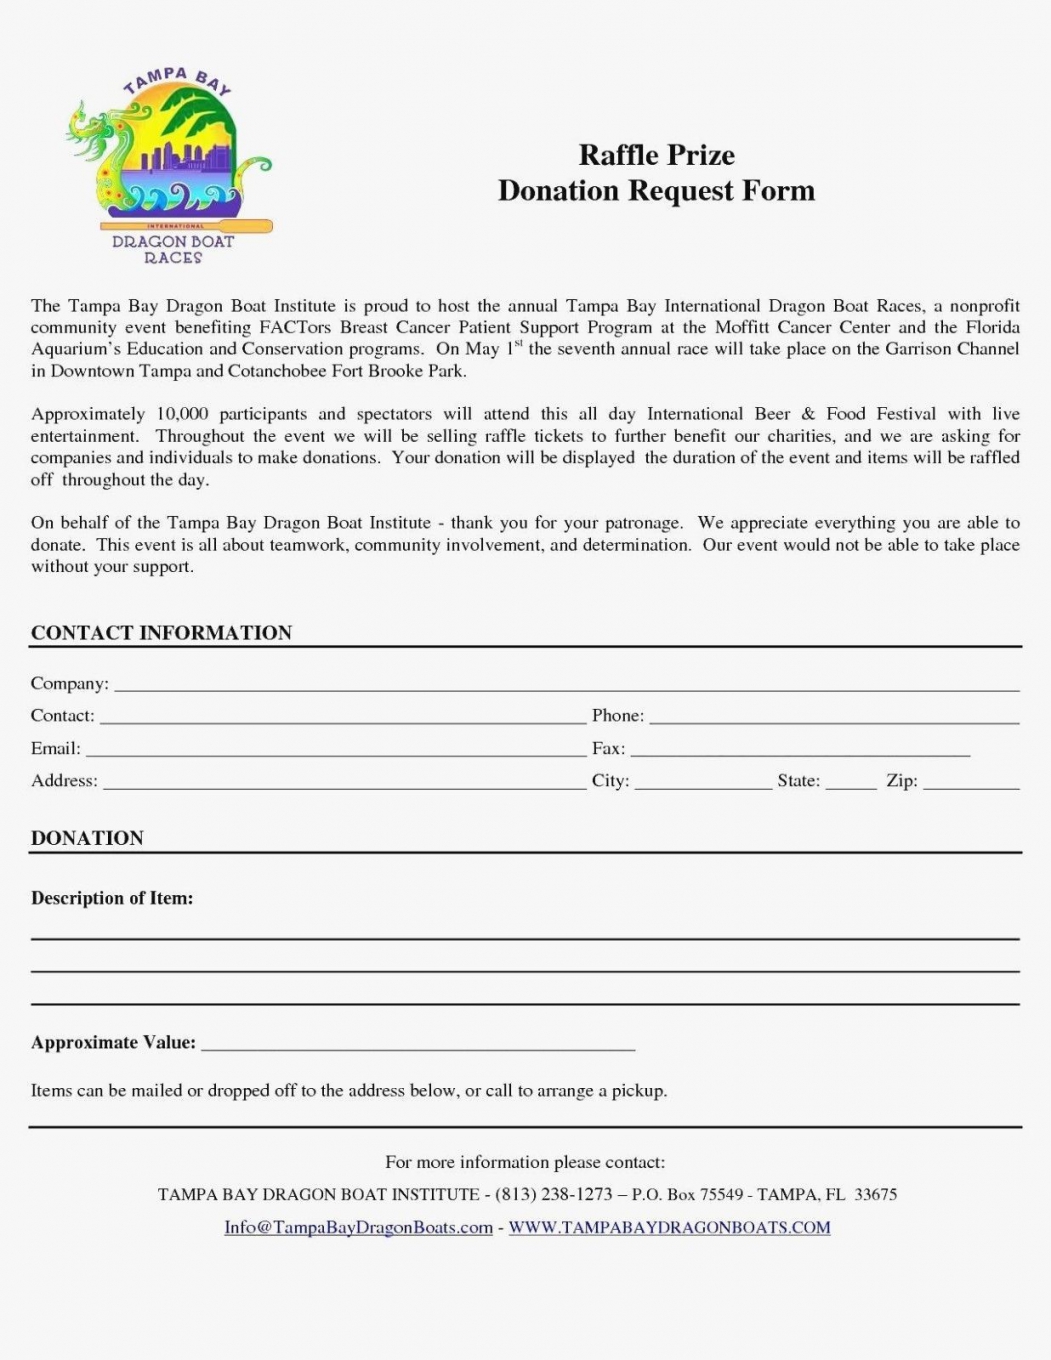 Donation Request Form Template